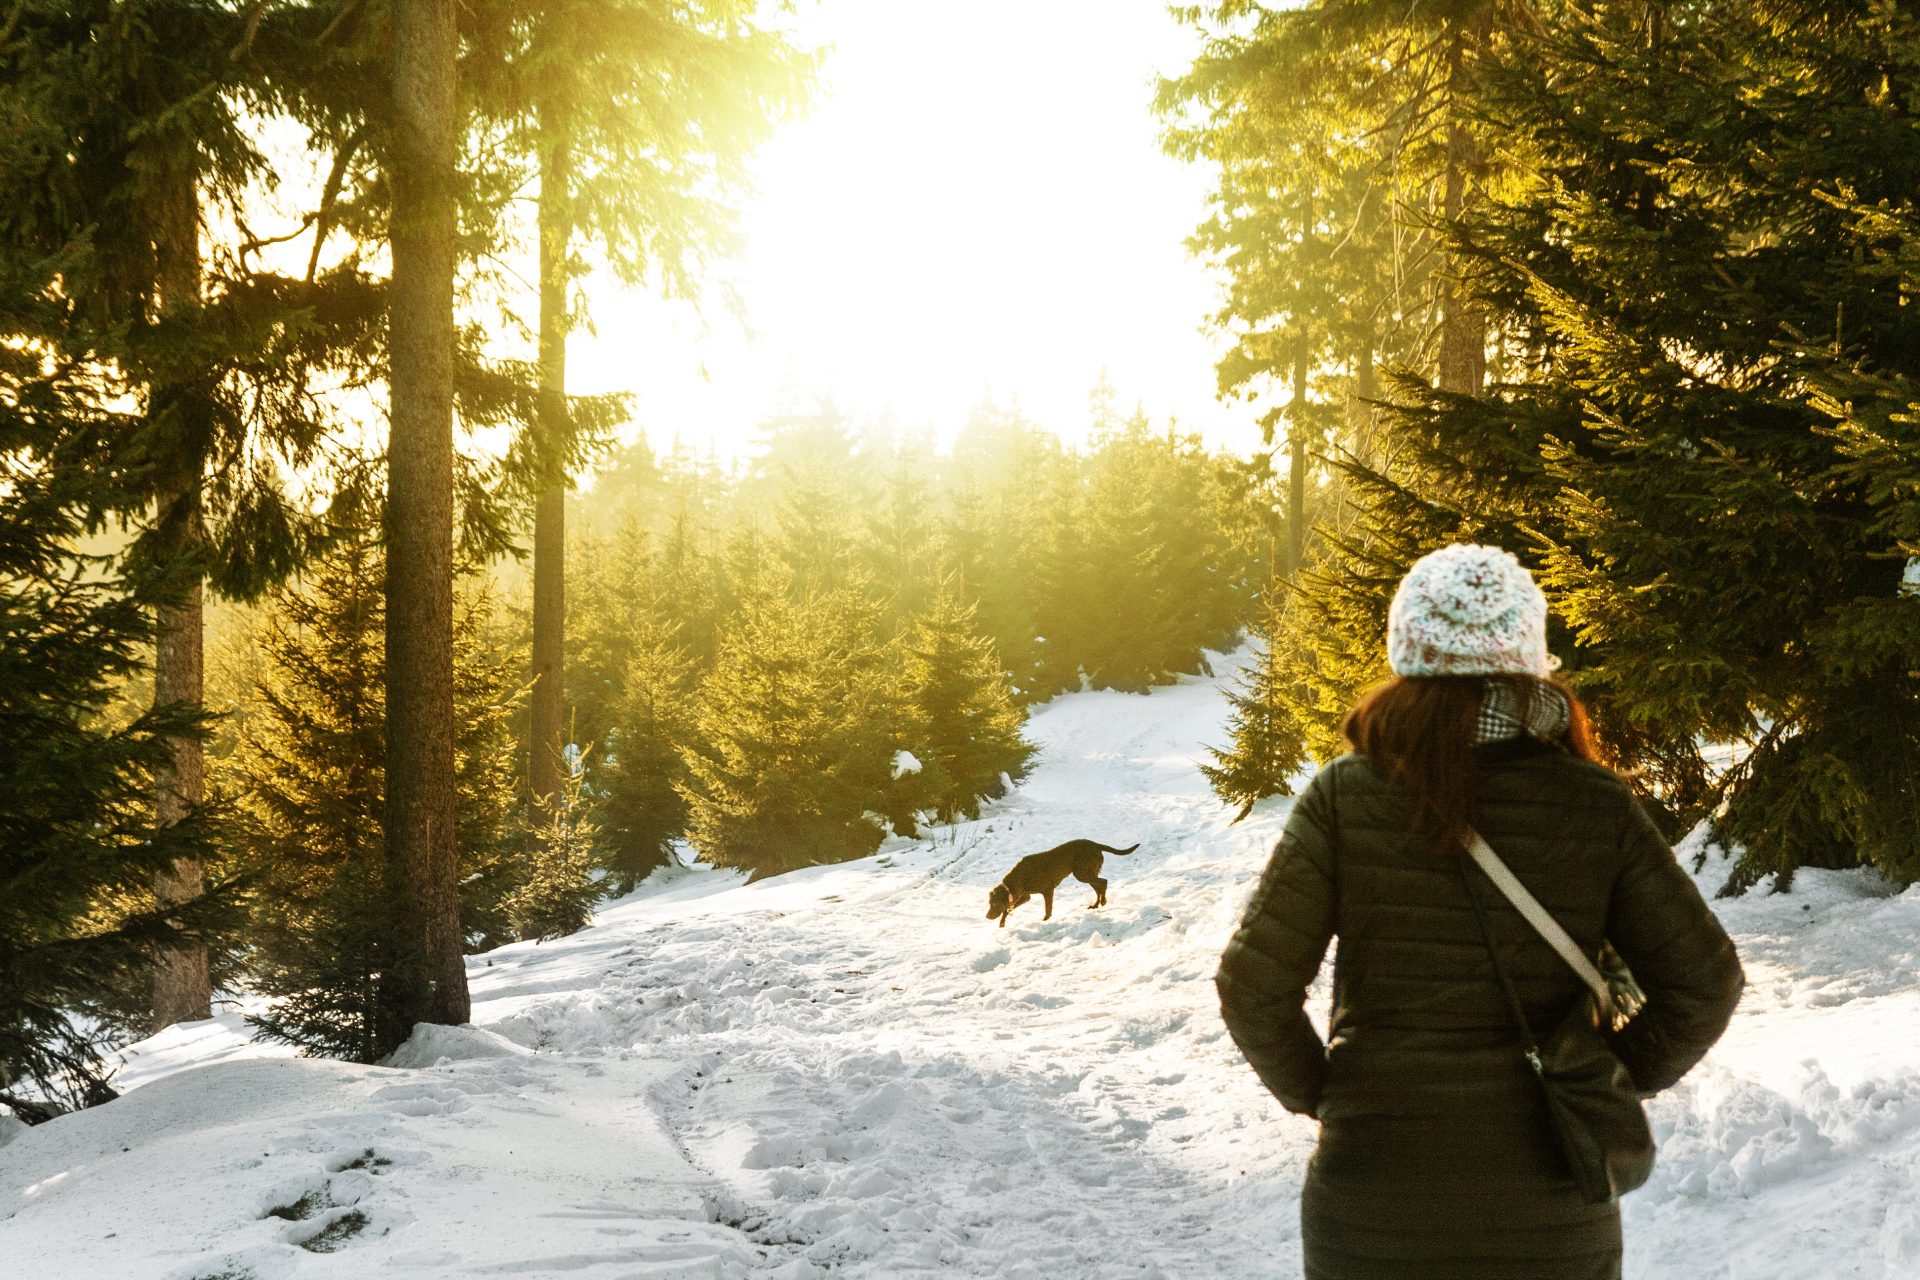 Take a Walk Outdoors Day: Forest bathing in the winter.